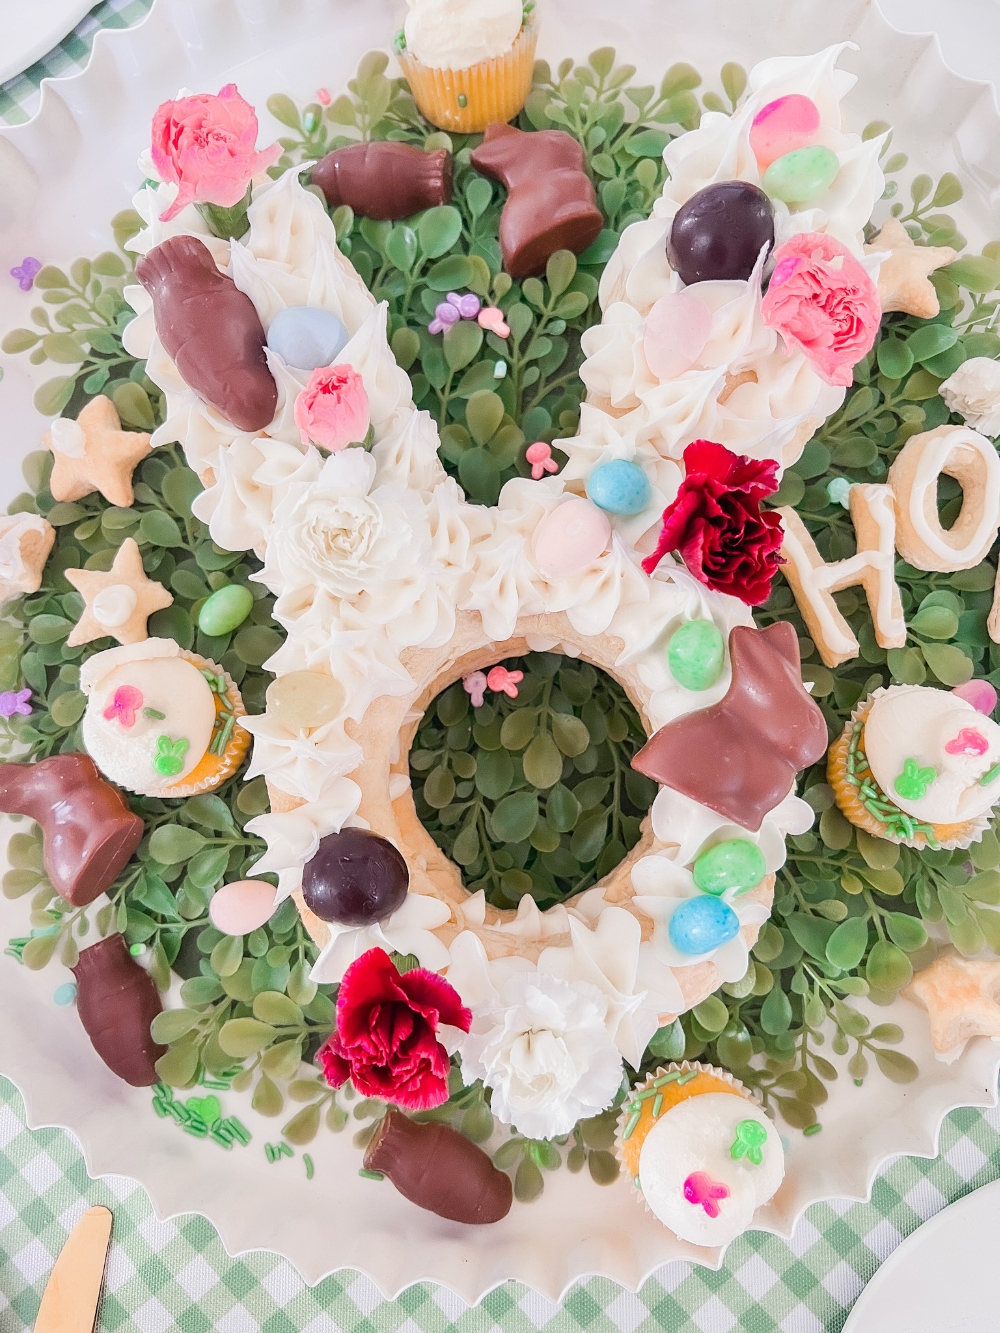 Bunny Puff Pastry Easter Tart. Layers of flaky crust and sweet cream cheese frosting make beautiful dessert  that also makes an edible centerpiece for your holiday table!